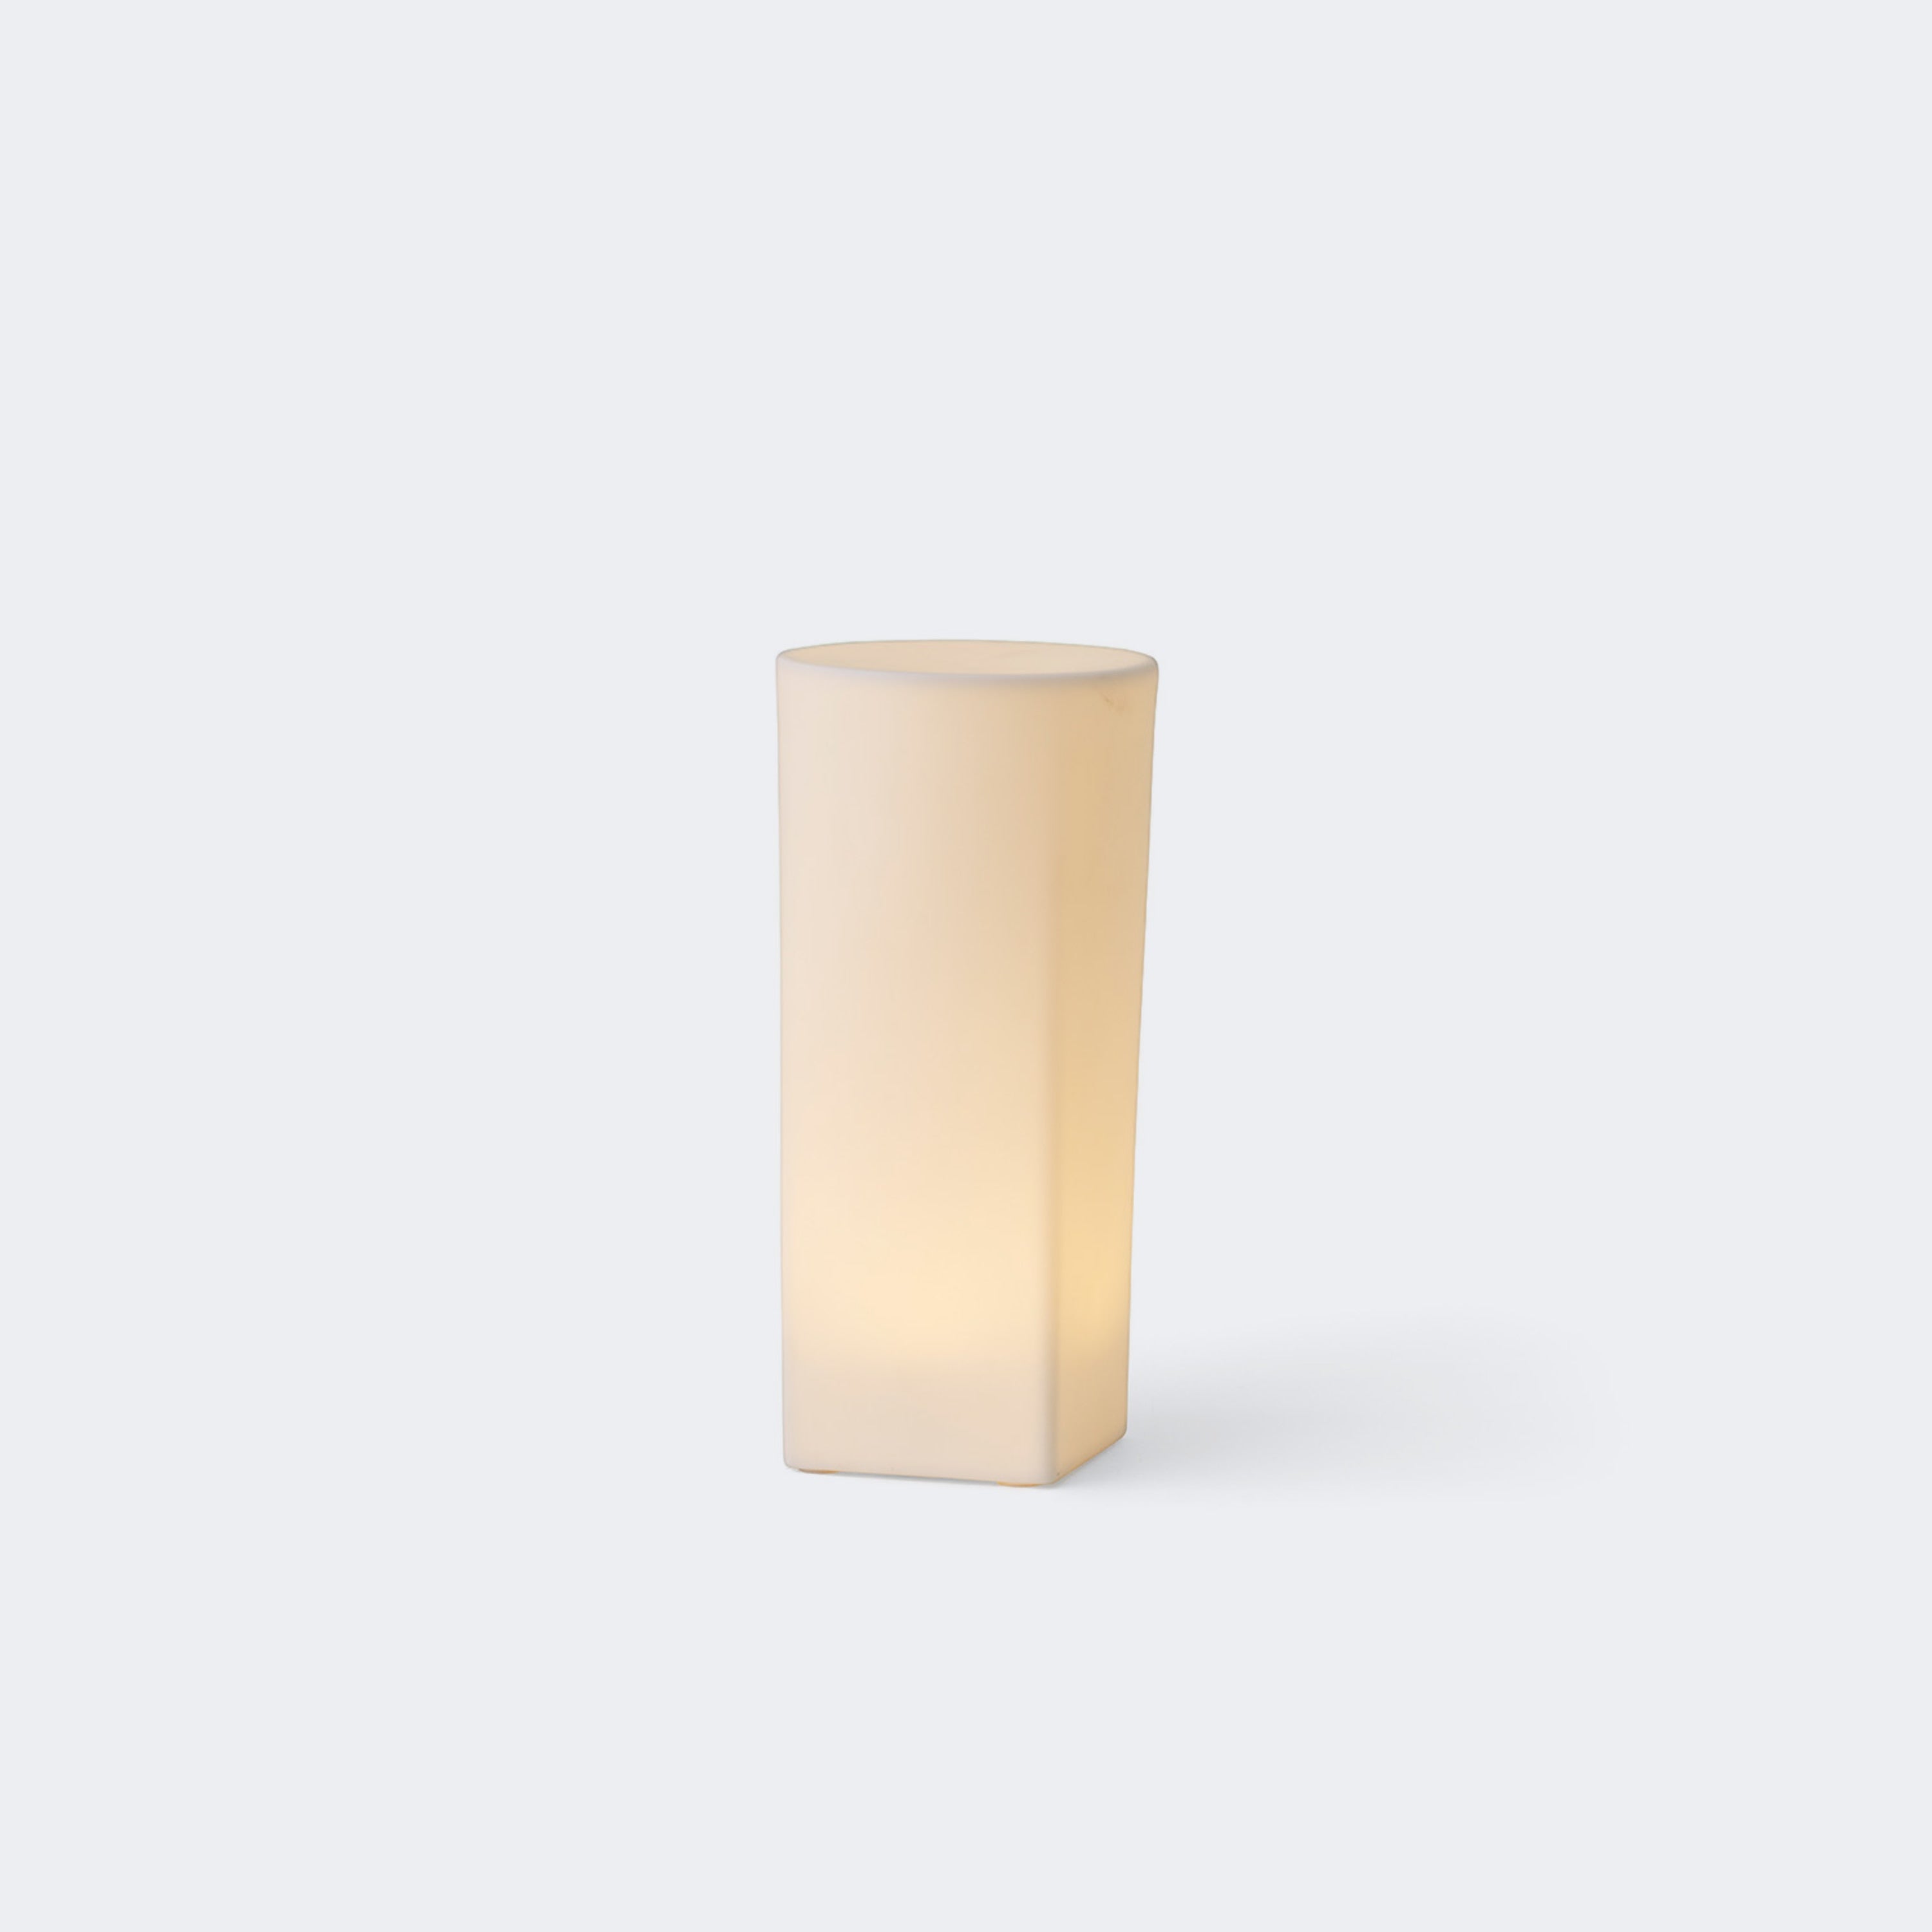 Audo Copenhagen Ignus Flameless Candle 8in - KANSO#Select Size_8in